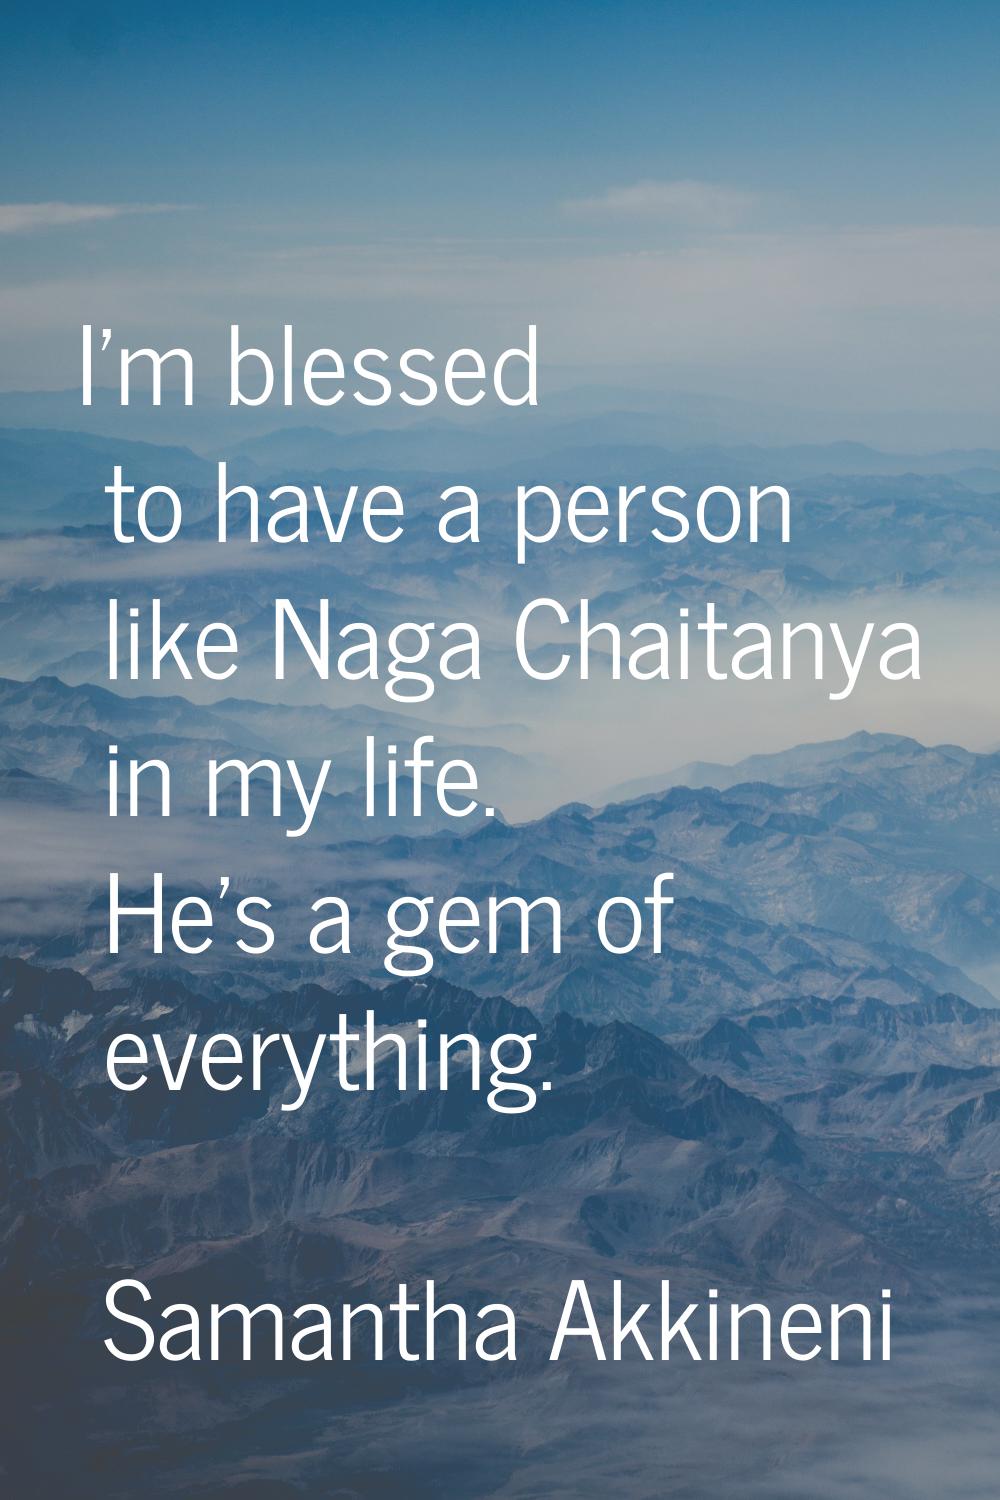 I'm blessed to have a person like Naga Chaitanya in my life. He's a gem of everything.